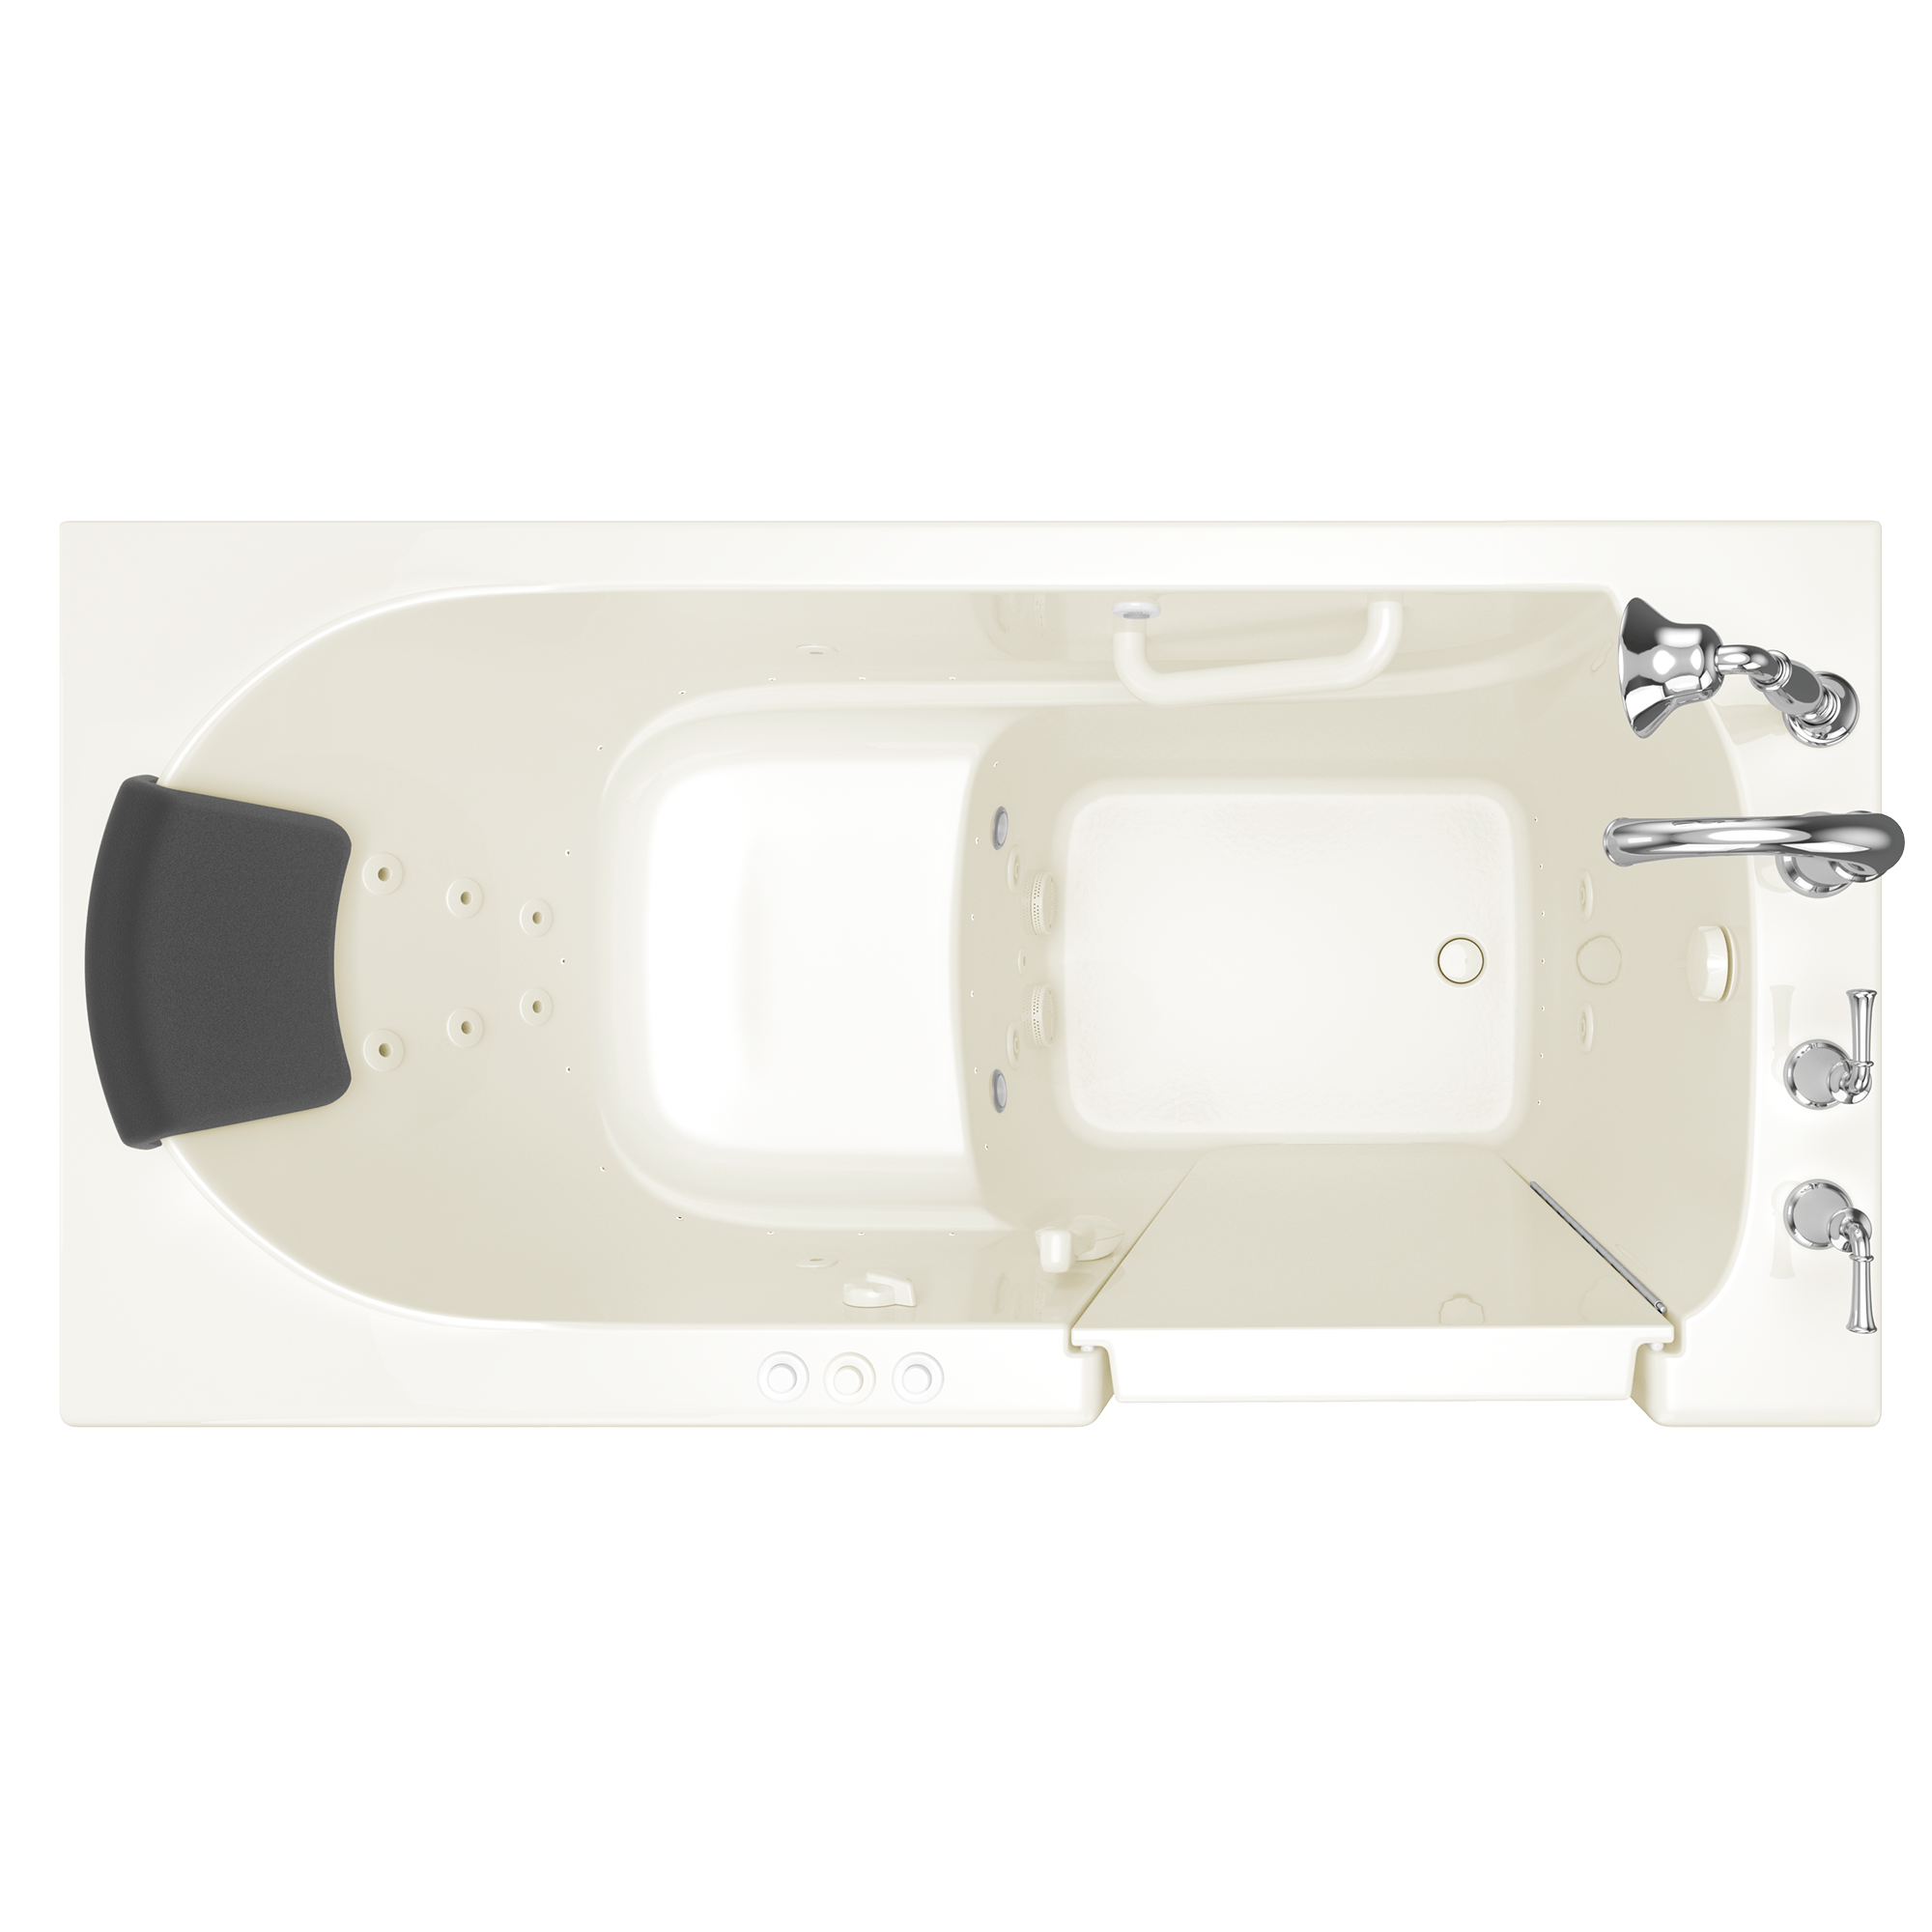 Gelcoat Premium Series 60x30 Inch Walk-In Bathtub with Dual Air Massage and Jet Massage System - Right Hand Door and Drain